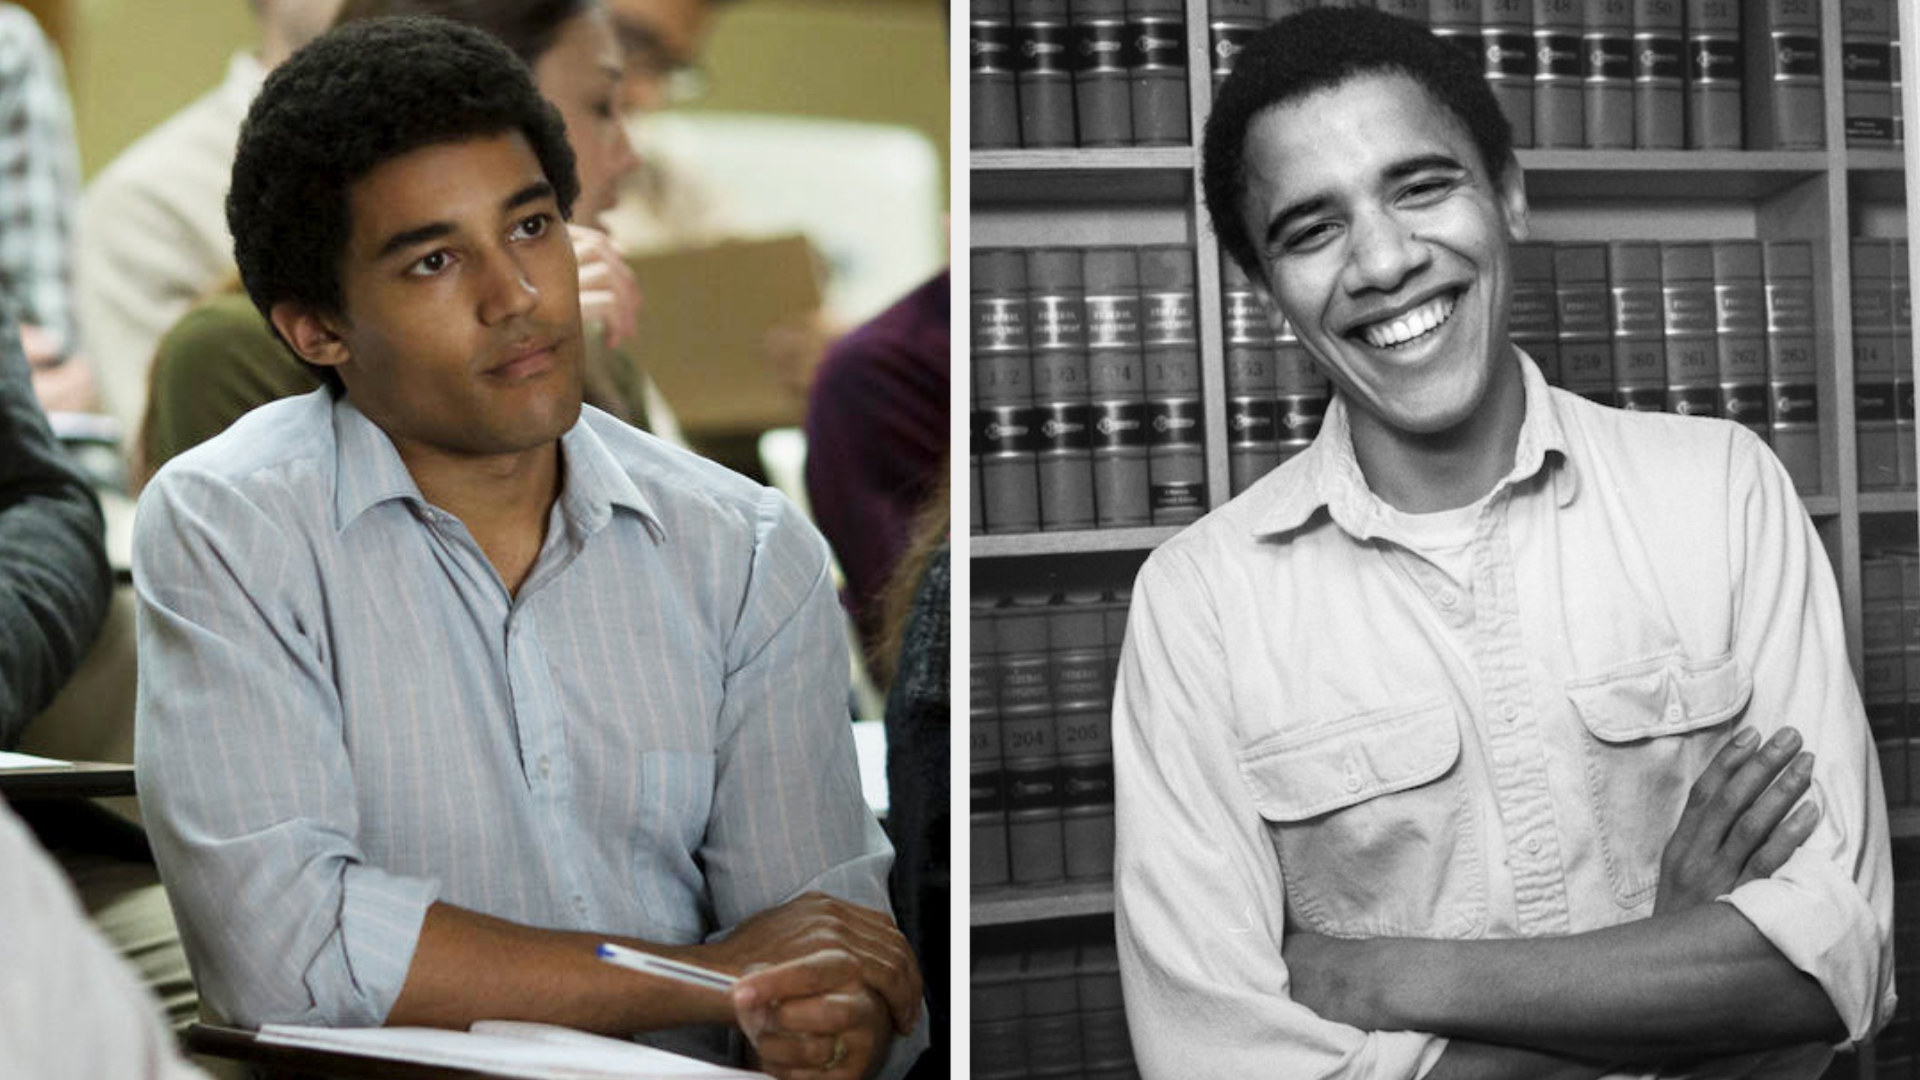 Devon Terrell as Barack Obama, sitting in class while holding a pen, concentrating; Barack Obama posing in a library with a very happy smile, folding his arms in front of him